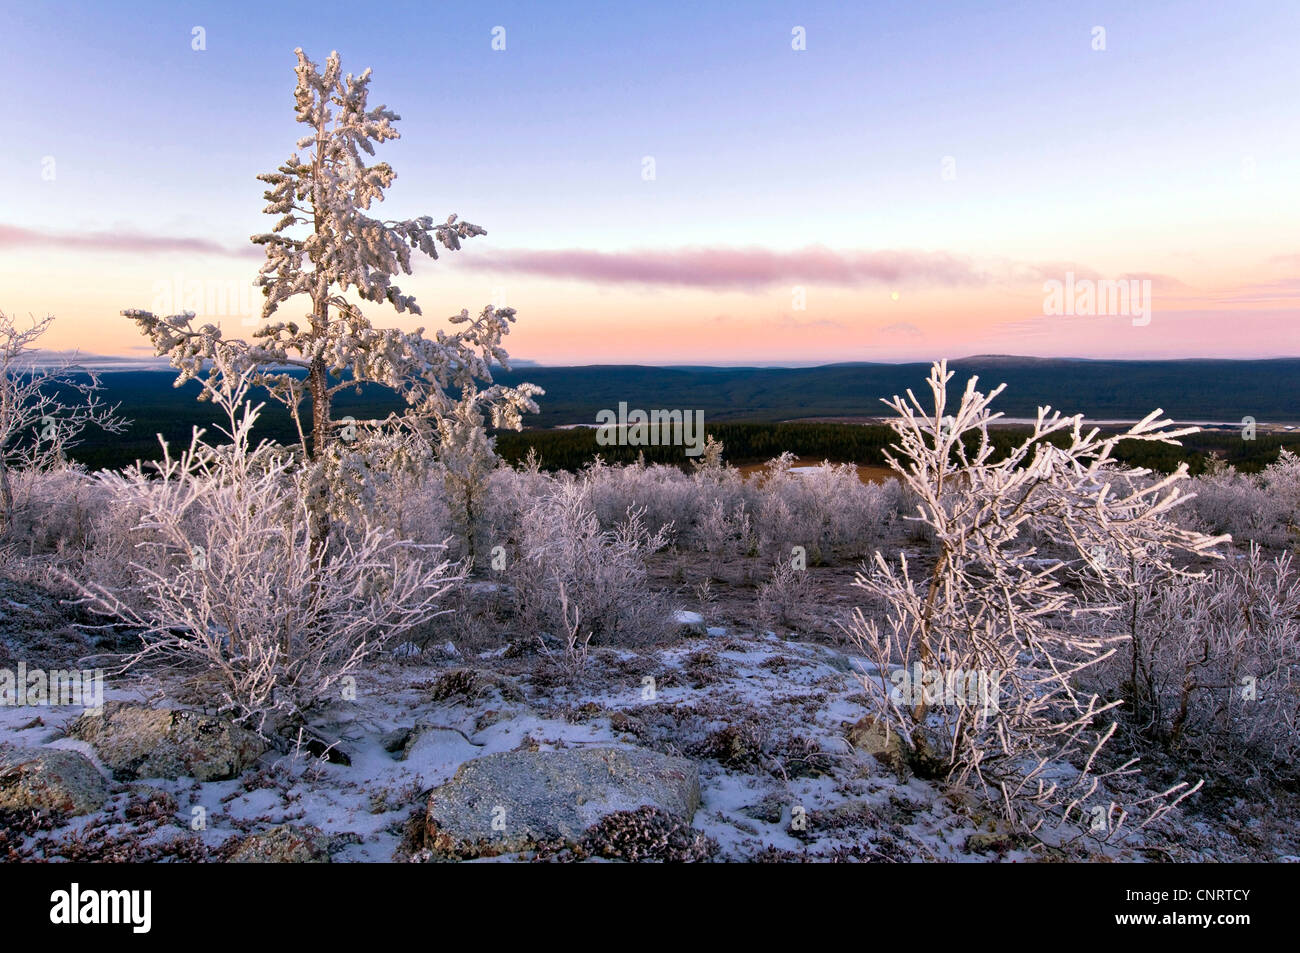 trees and shrubs with hoar frost, Sweden, Lapland, Gaellivare Stock Photo